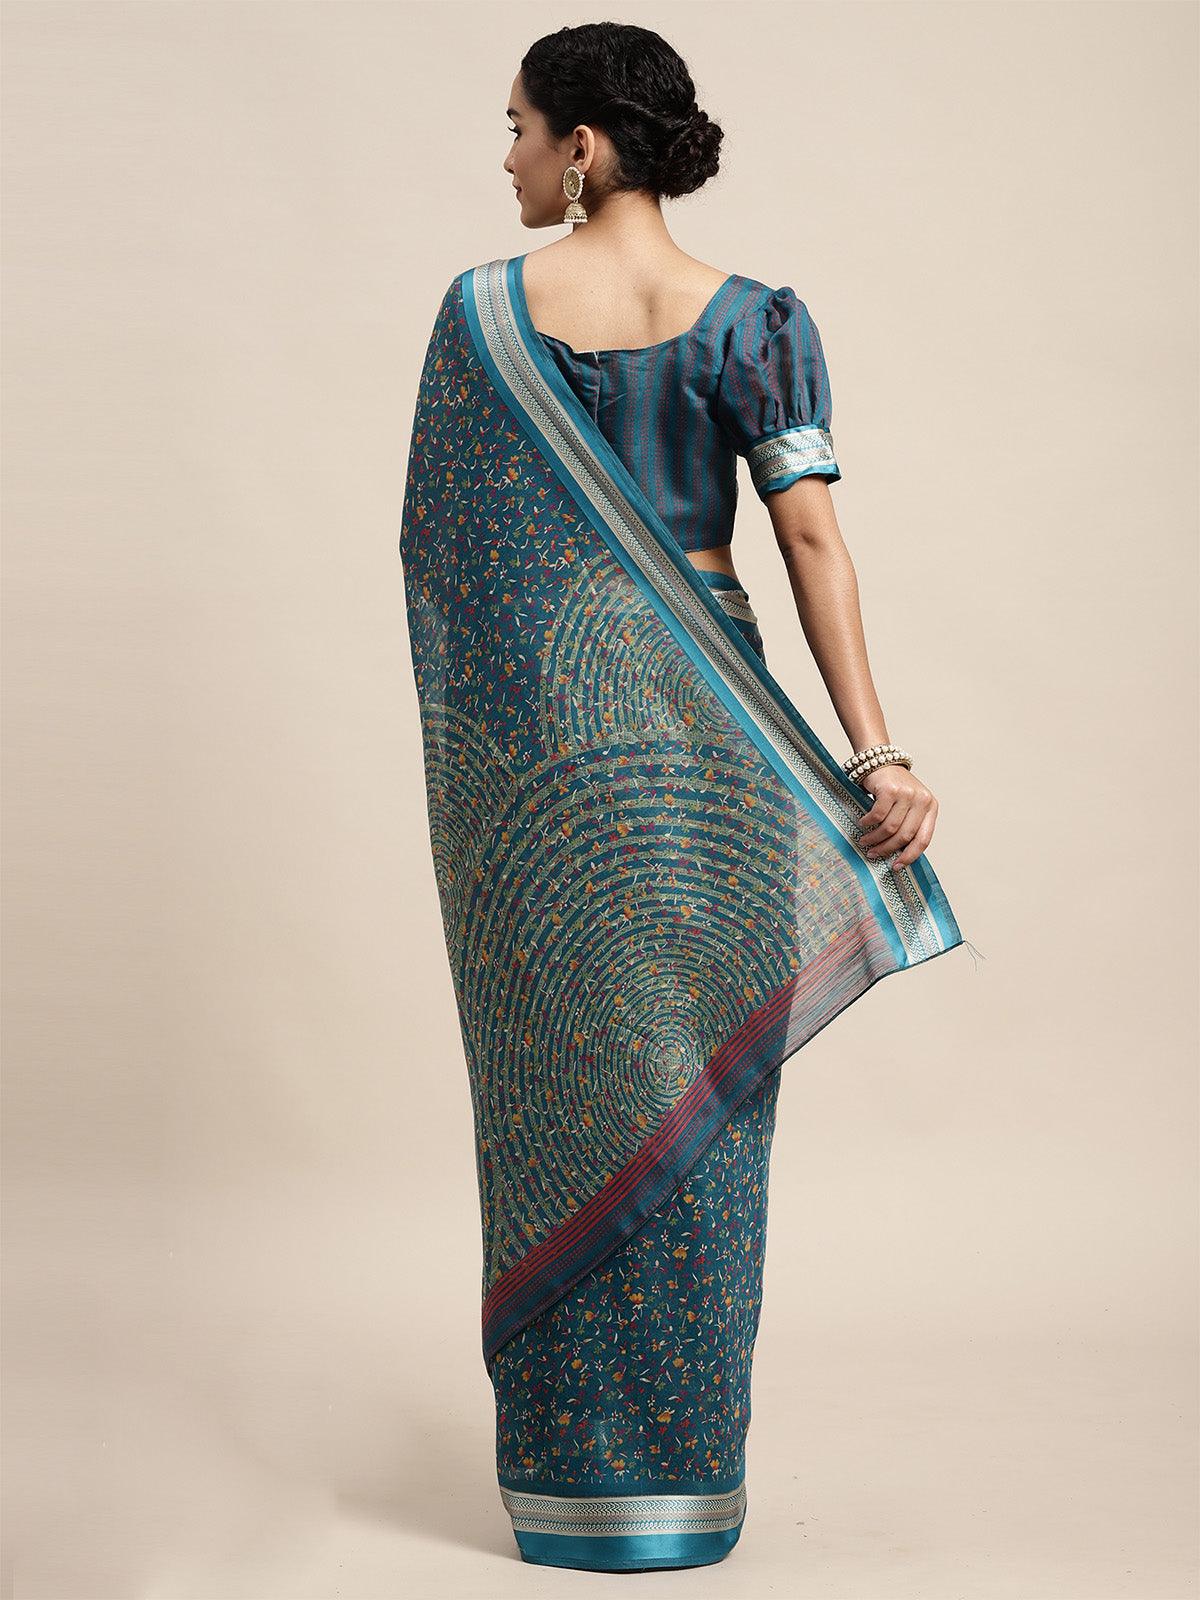 Women's Cotton Silk Turquoise Printed Saree With Blouse Piece - Odette